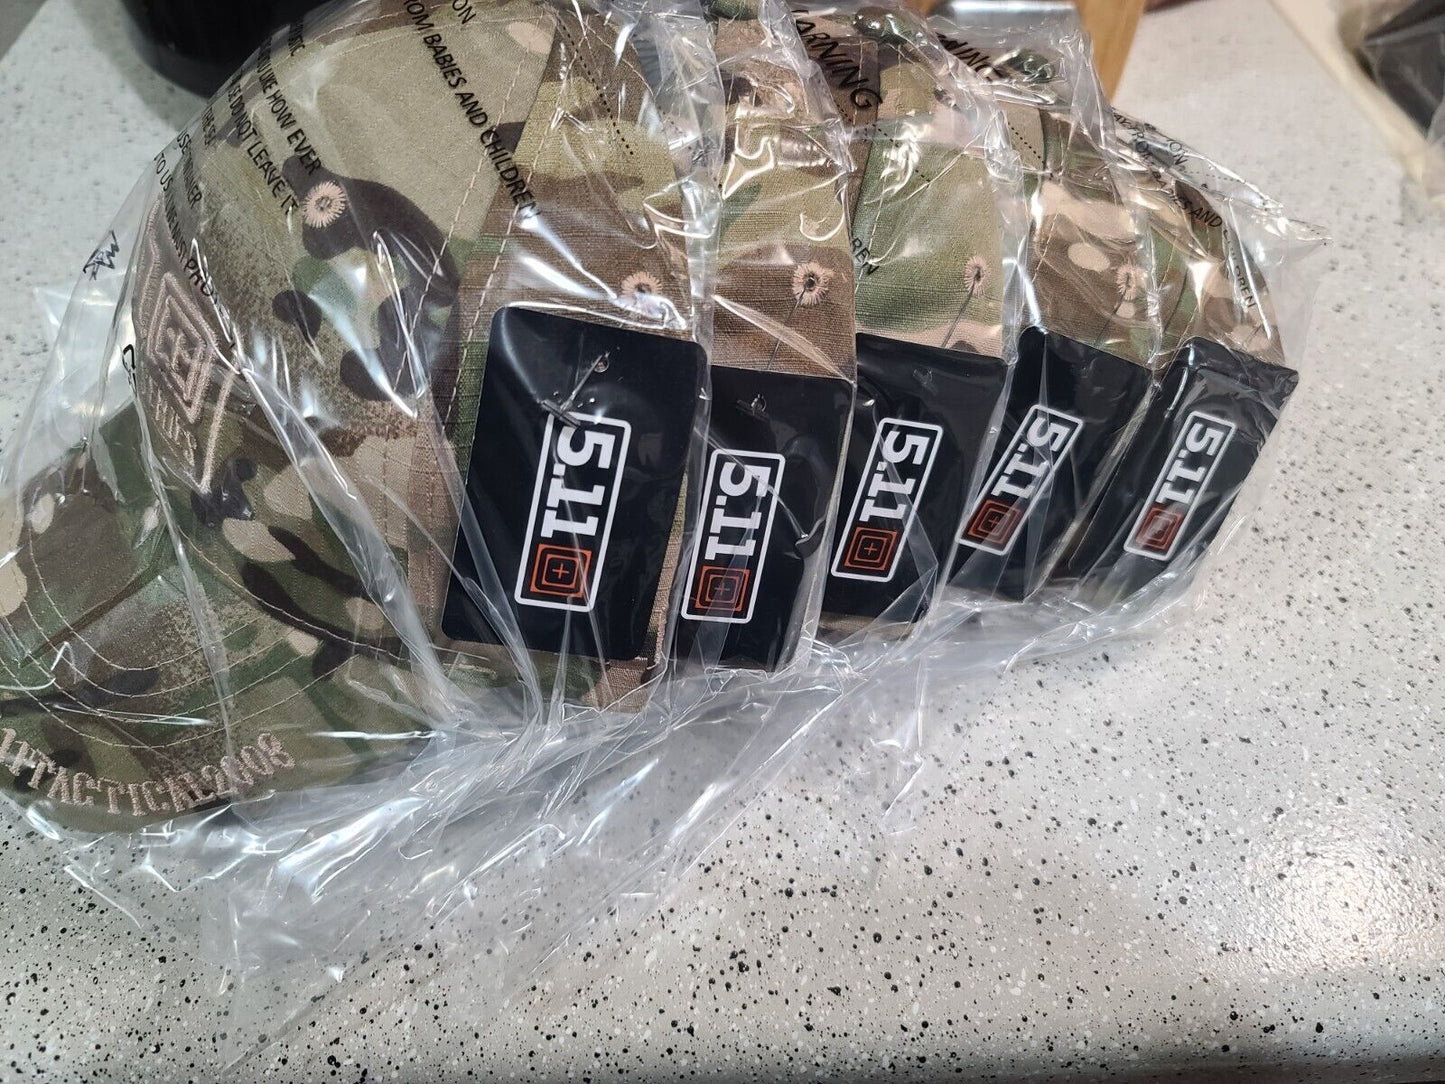 5.11 STYLE CP MULTICAM TACTICAL HAT.